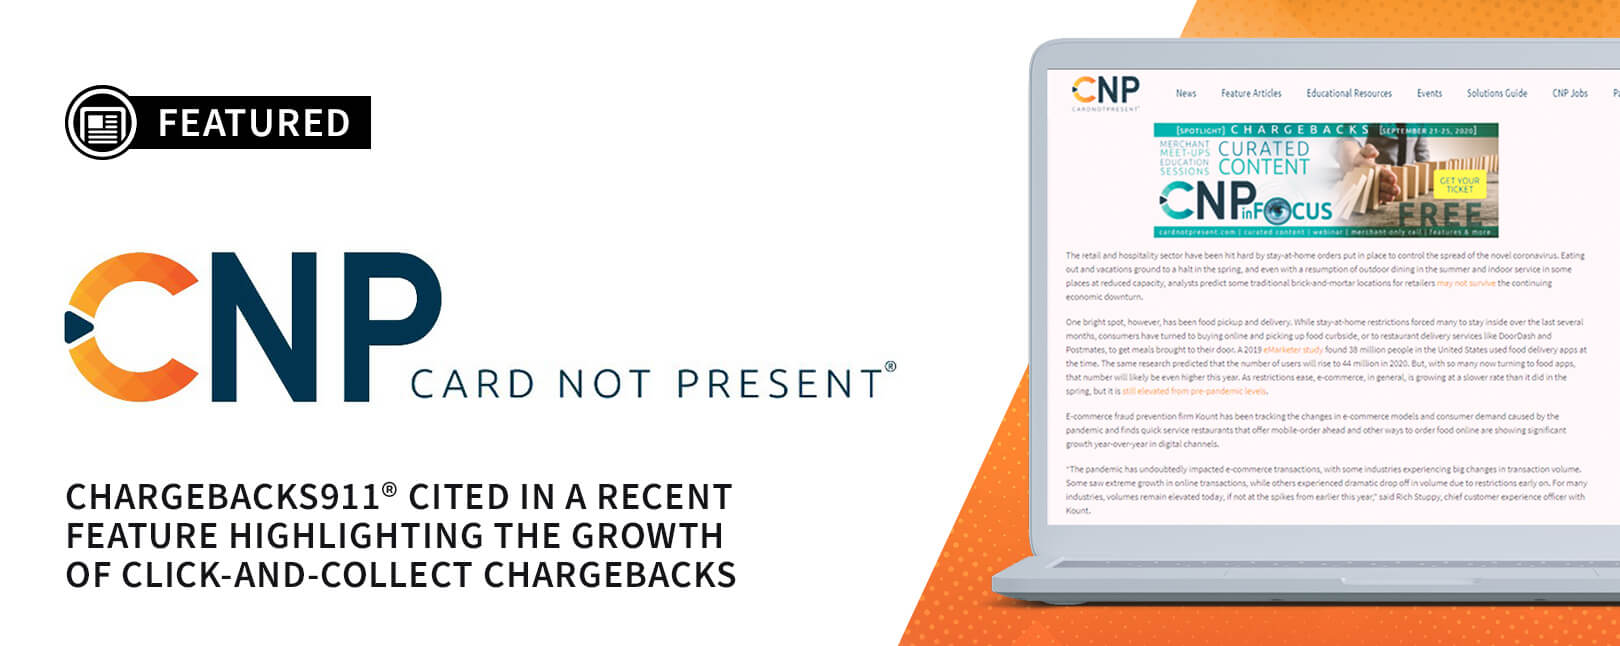 Chargebacks911® Cited in New Feature for Card Not Present